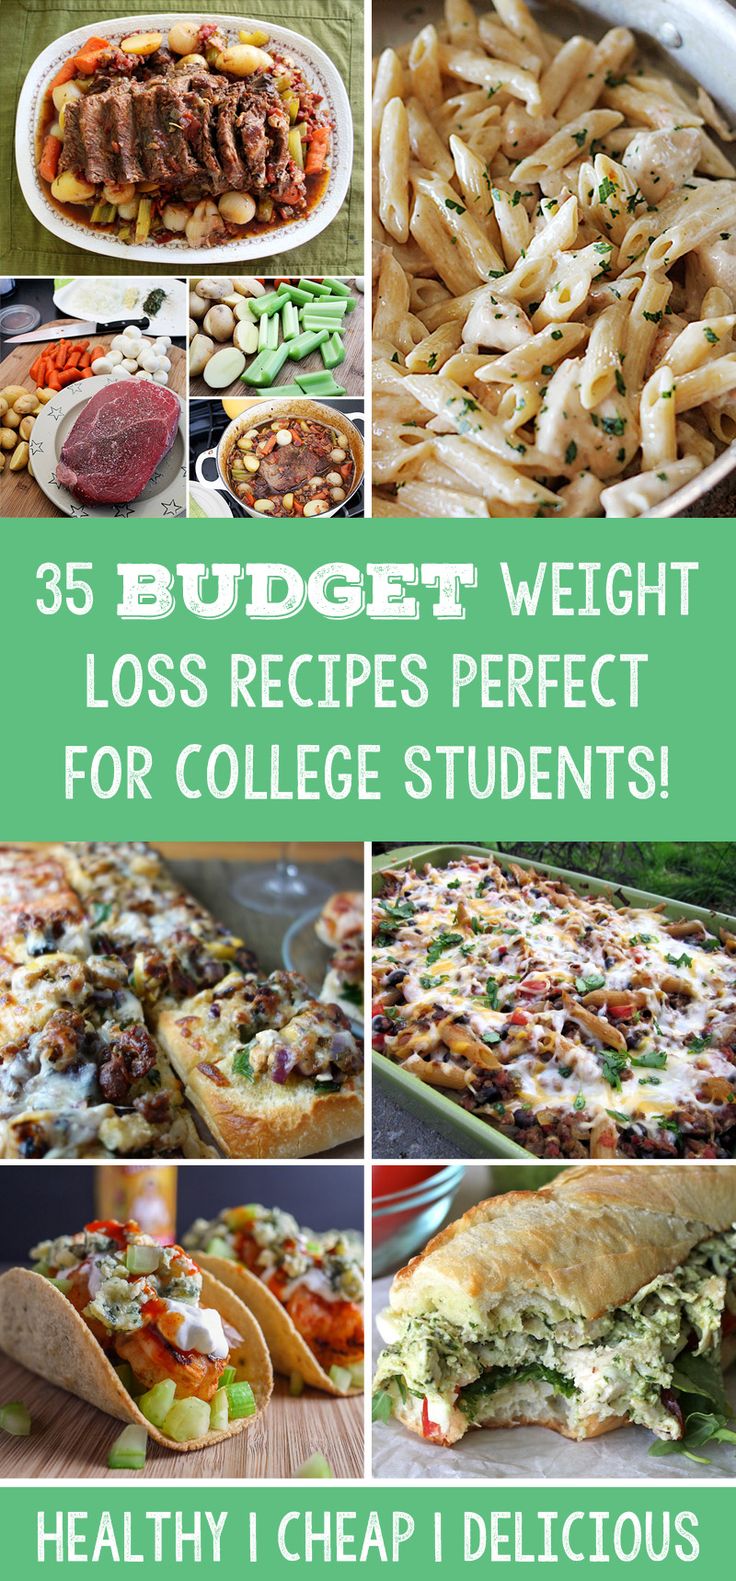 healthy recipes for weight loss on a budget 2013